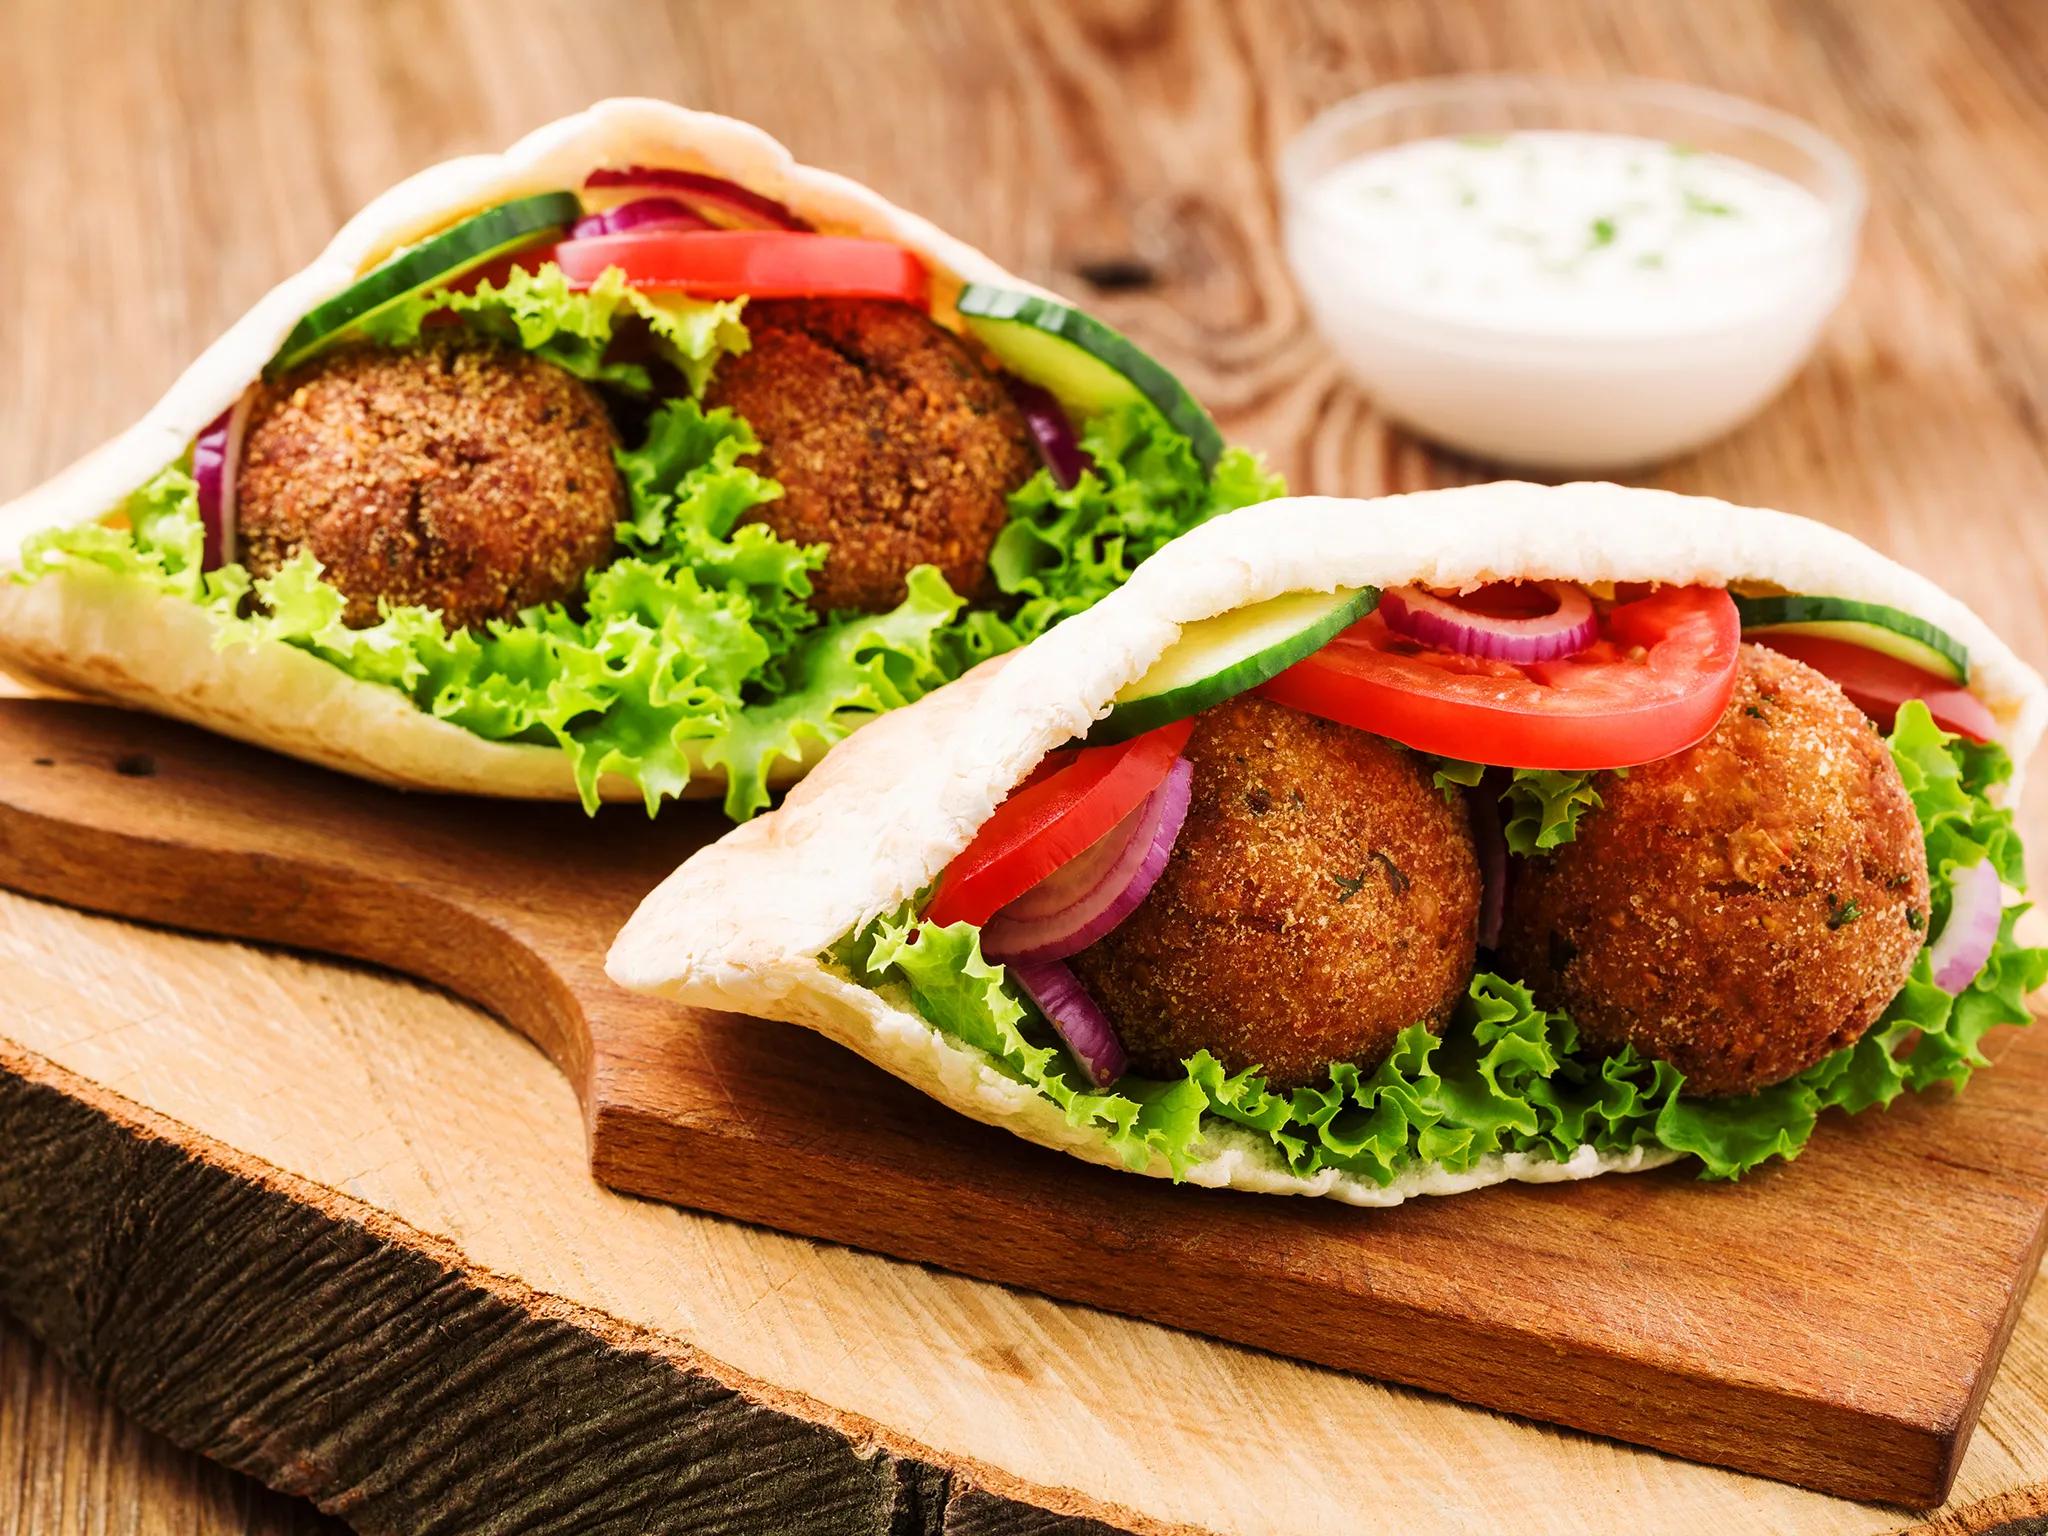 Falafel - paired with sabich makes tasty street food in Tel Aviv